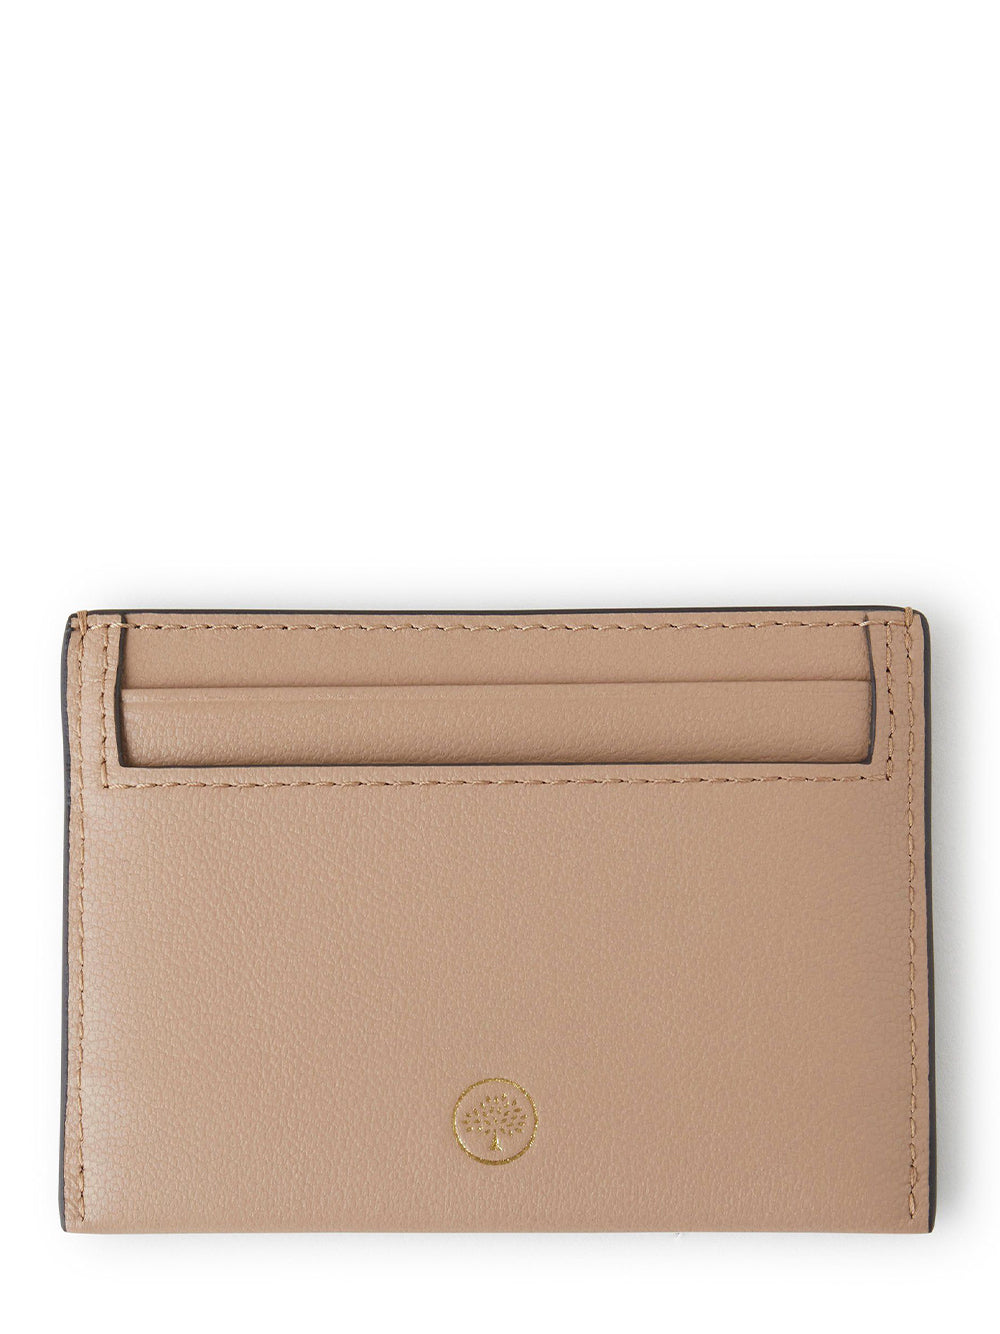 Mulberry-ContinentalCreditCardSlipMicroClassicGrainLeather-Maple-2